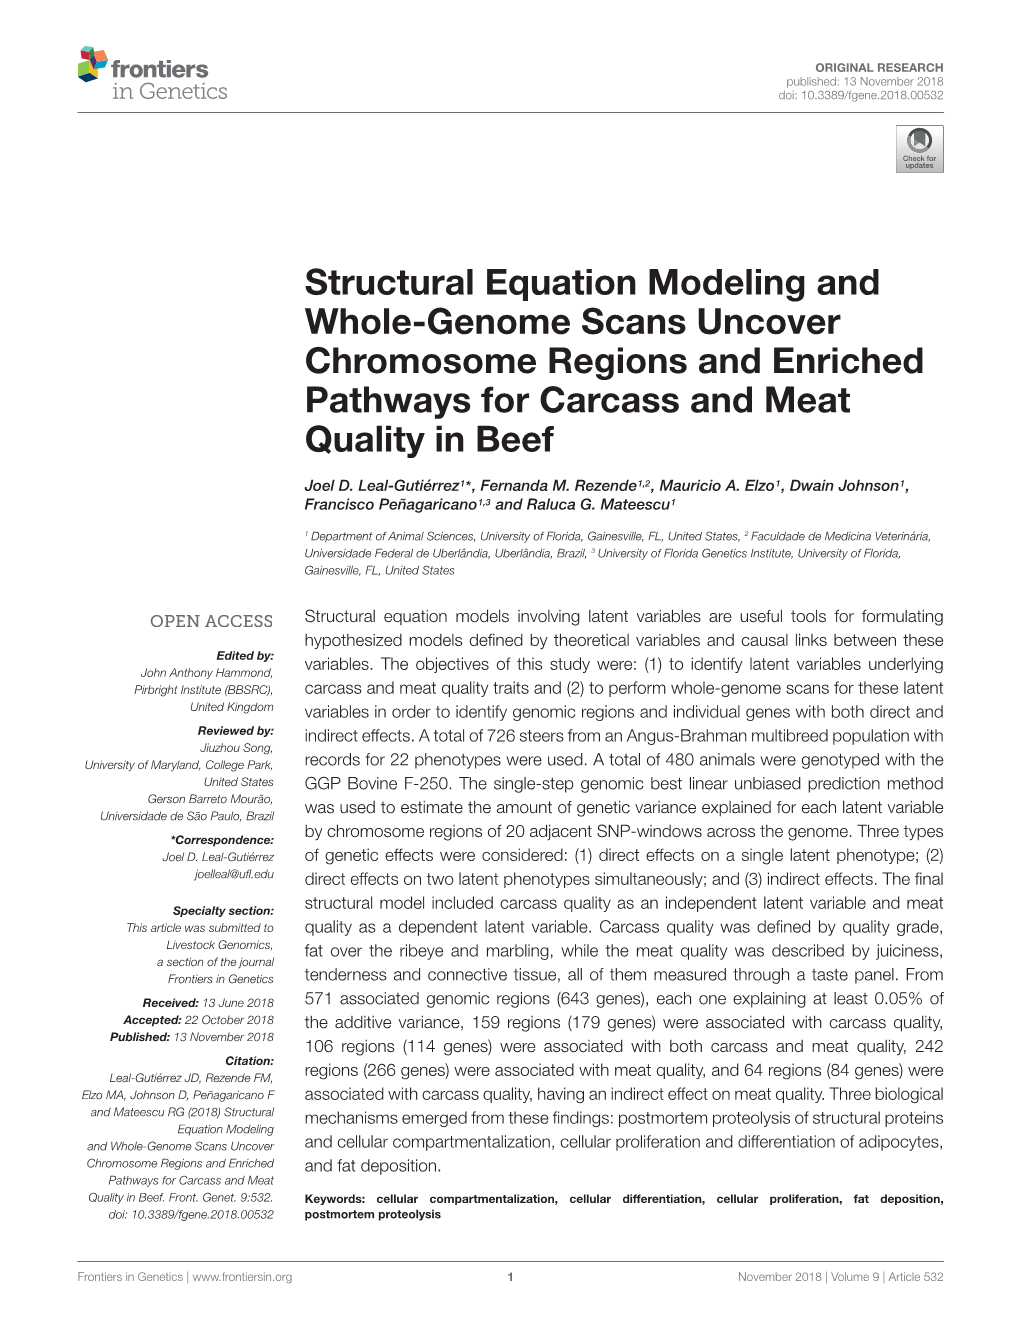 Structural Equation Modeling and Whole-Genome Scans Uncover Chromosome Regions and Enriched Pathways for Carcass and Meat Quality in Beef